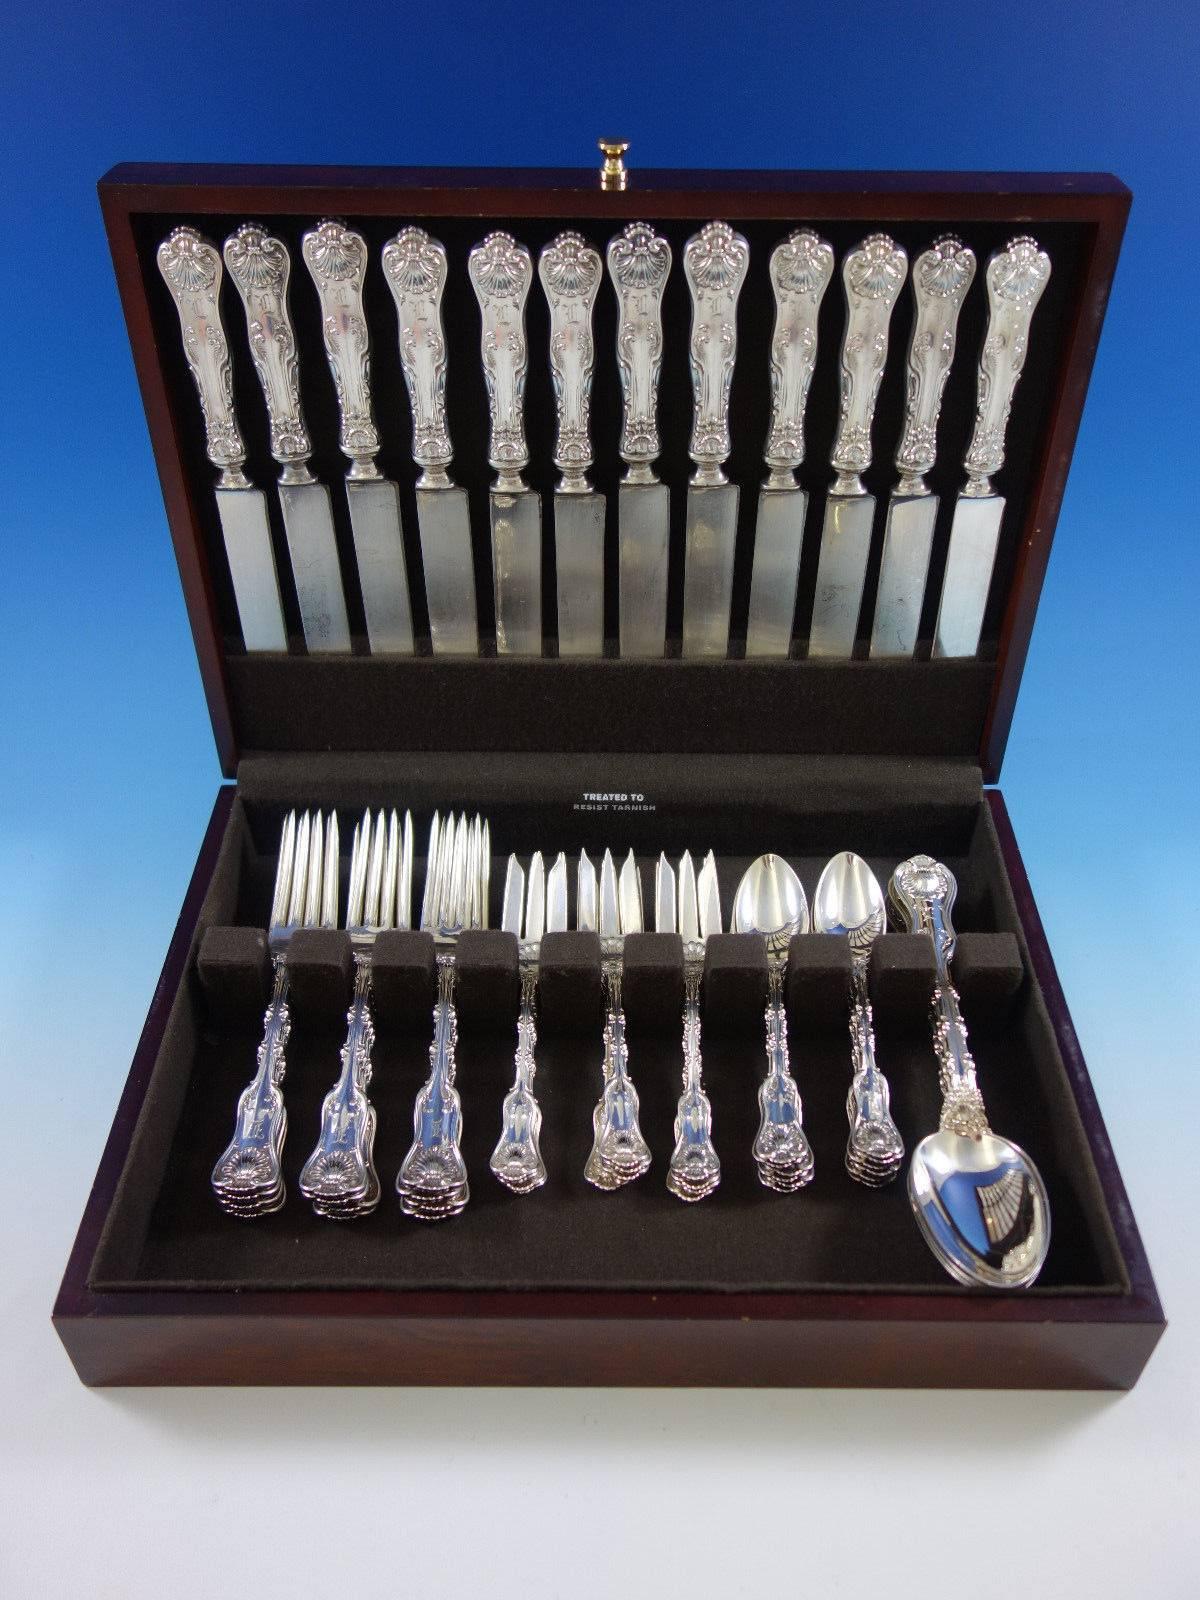 Dinner size imperial queen sterling silver flatware set with shell motif, 54 pieces. This set includes: 

12 dinner size knives, blunt silver plated blades (some light edge wear), 9 1/2